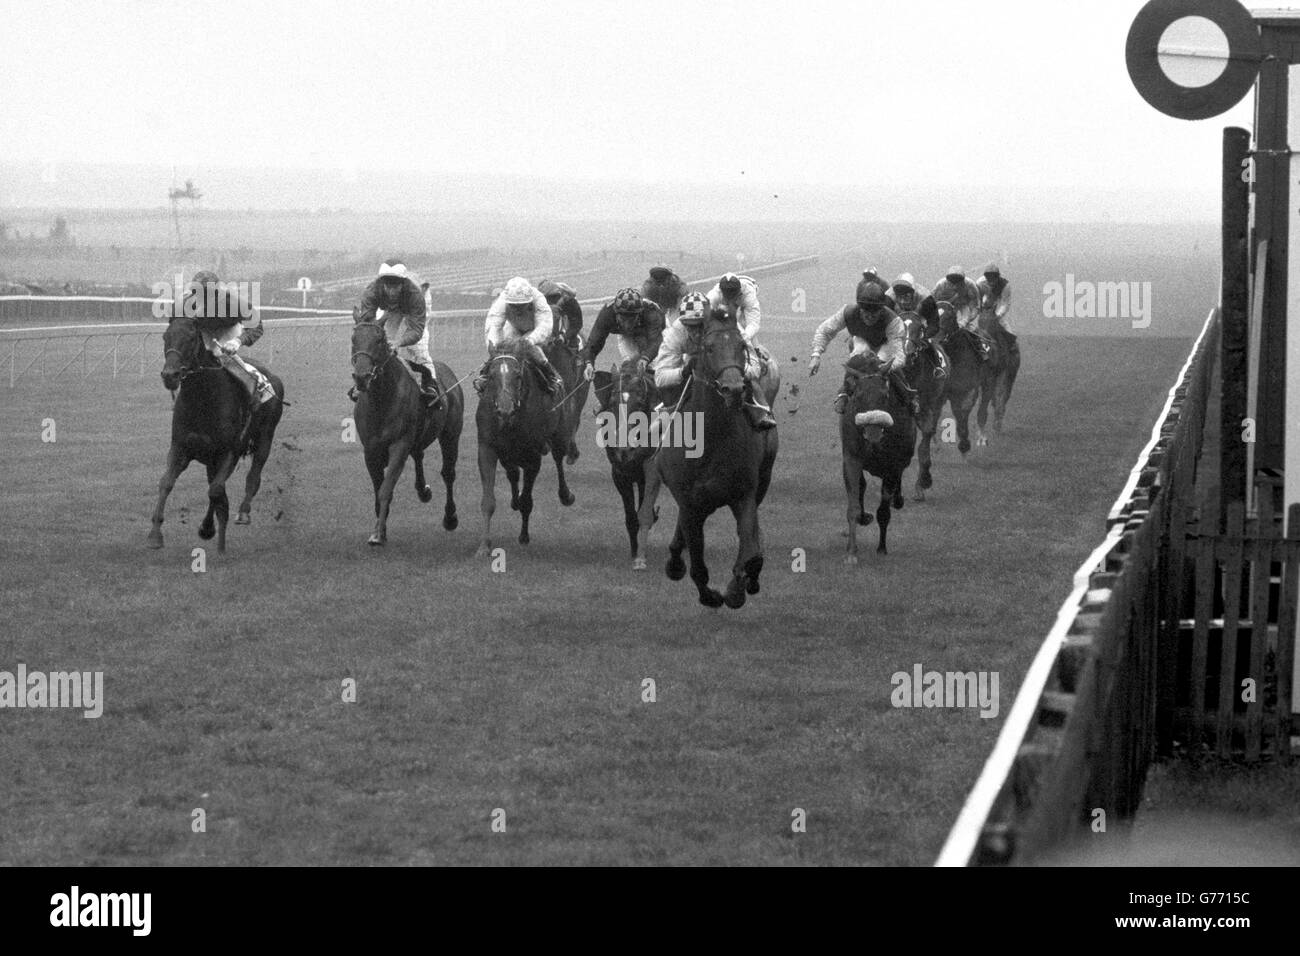 Scintillating Air, ridden by E Hide, wins the Plantation Maiden Stakes at Newmarket, ahead of J Mercer on Stars in Your Eyes and G Starkey on Queensbury Boy. Stock Photo